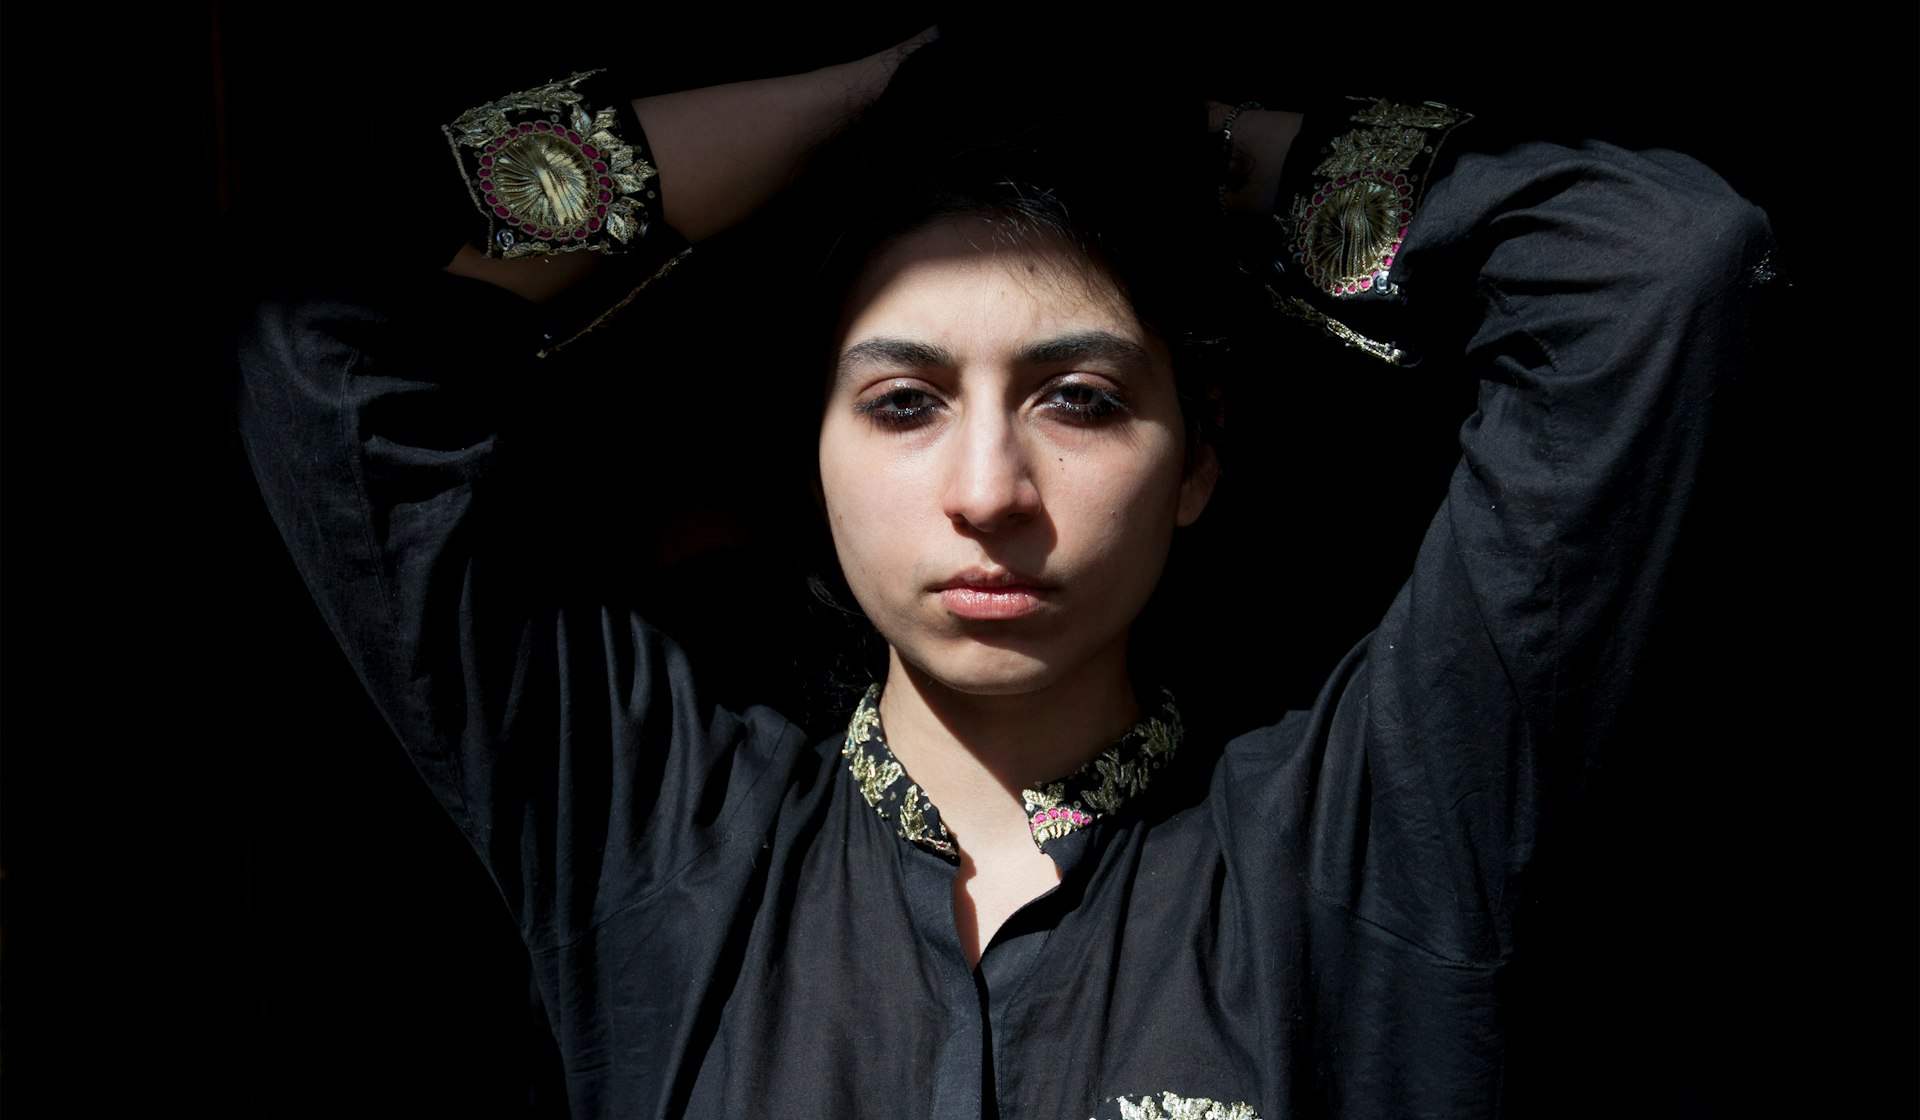 From Pakistan to Brooklyn, Arooj Aftab is following the beat of her own dreams